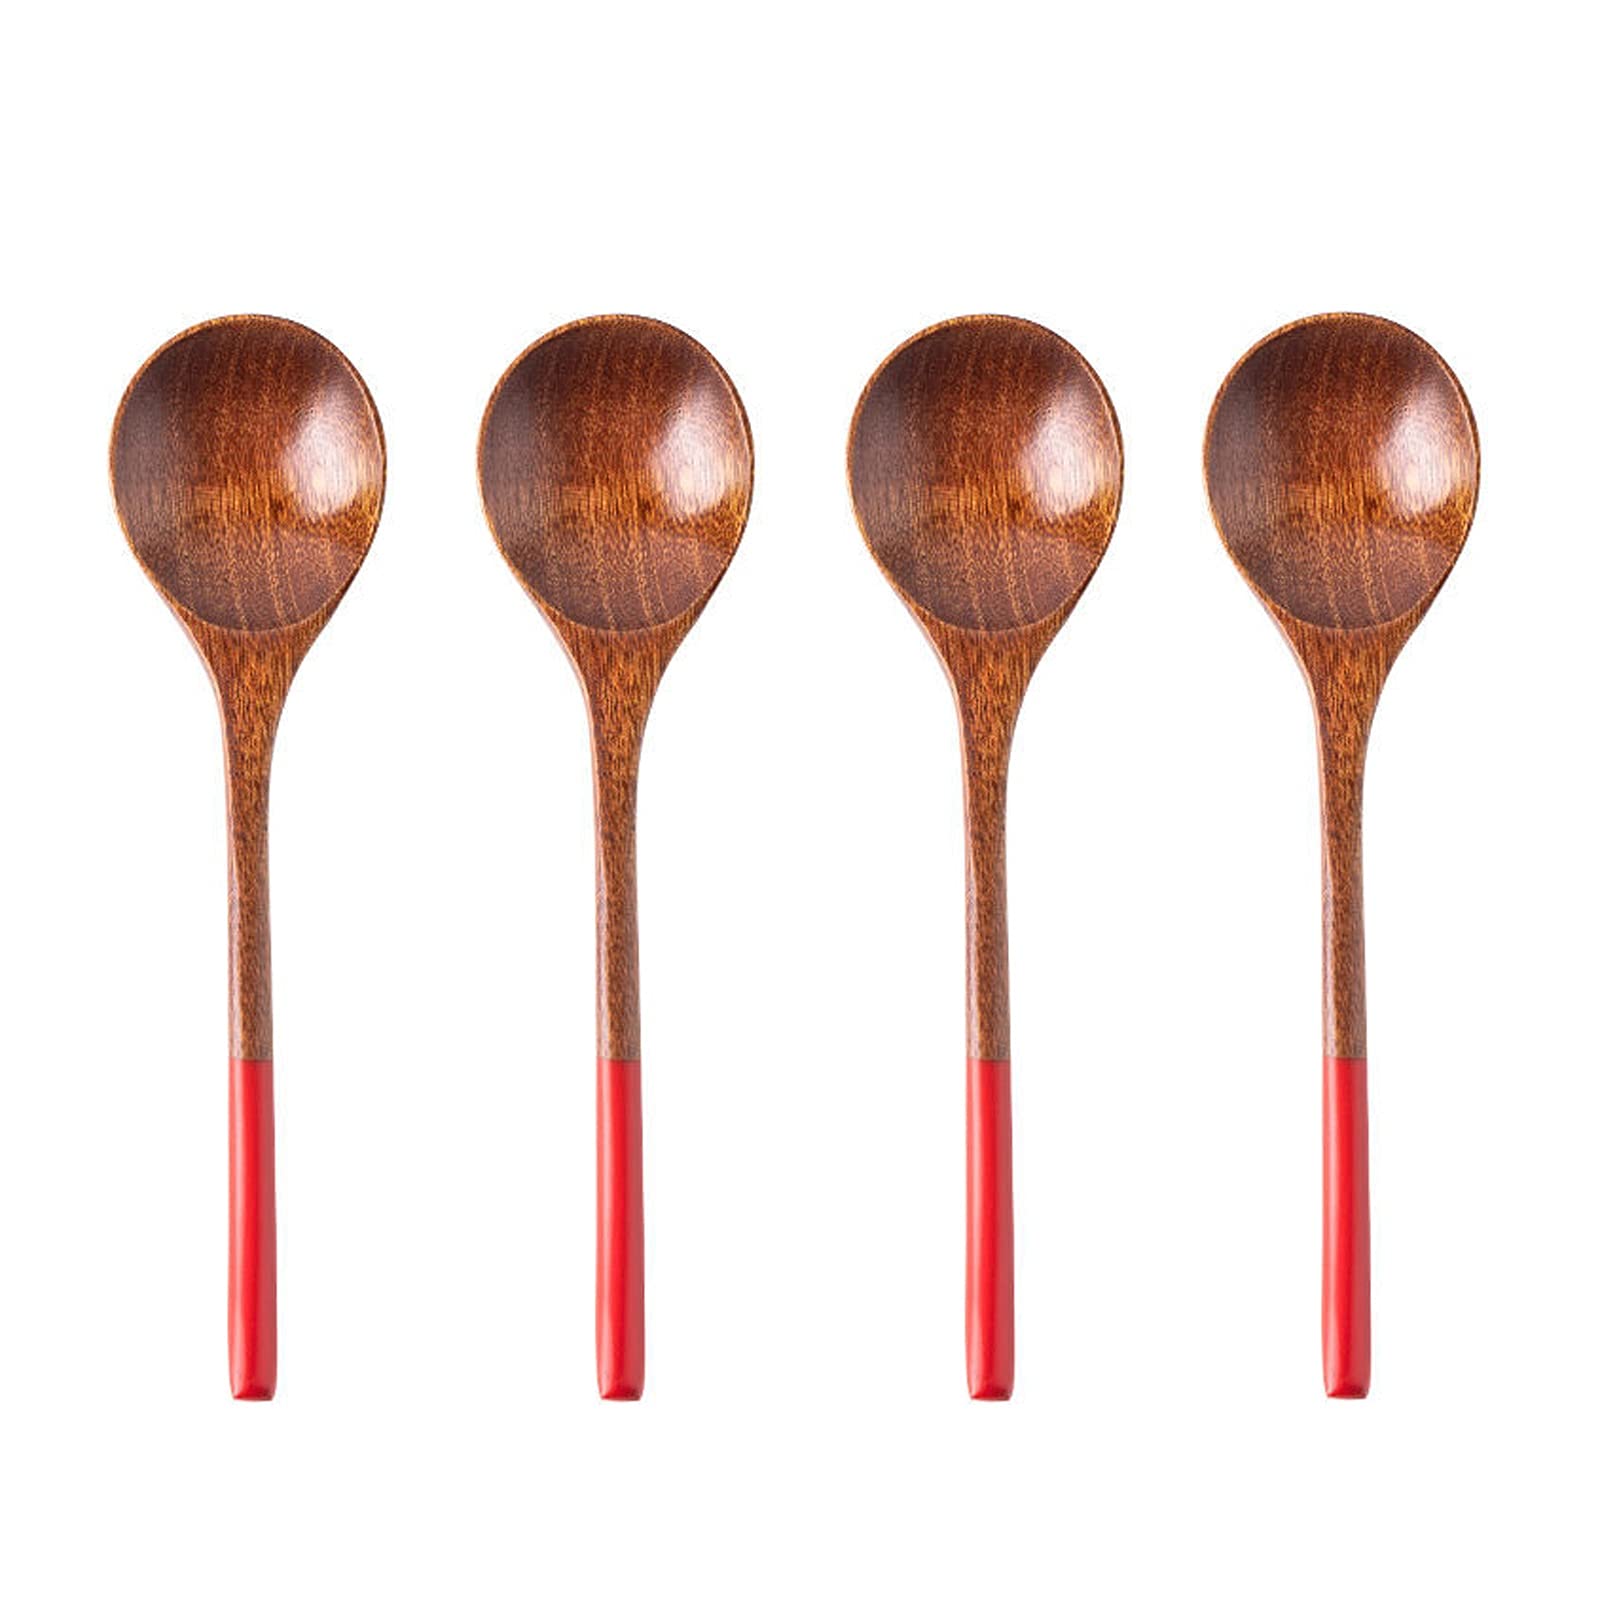 Cooking Spoons 4 Pcs Creative Japanese Style Wooden Spoon Teaspoons Handmade Wood Iced Tea Spoons Small Stirring Spoon Espresso Mixing Spoons Table Spoons